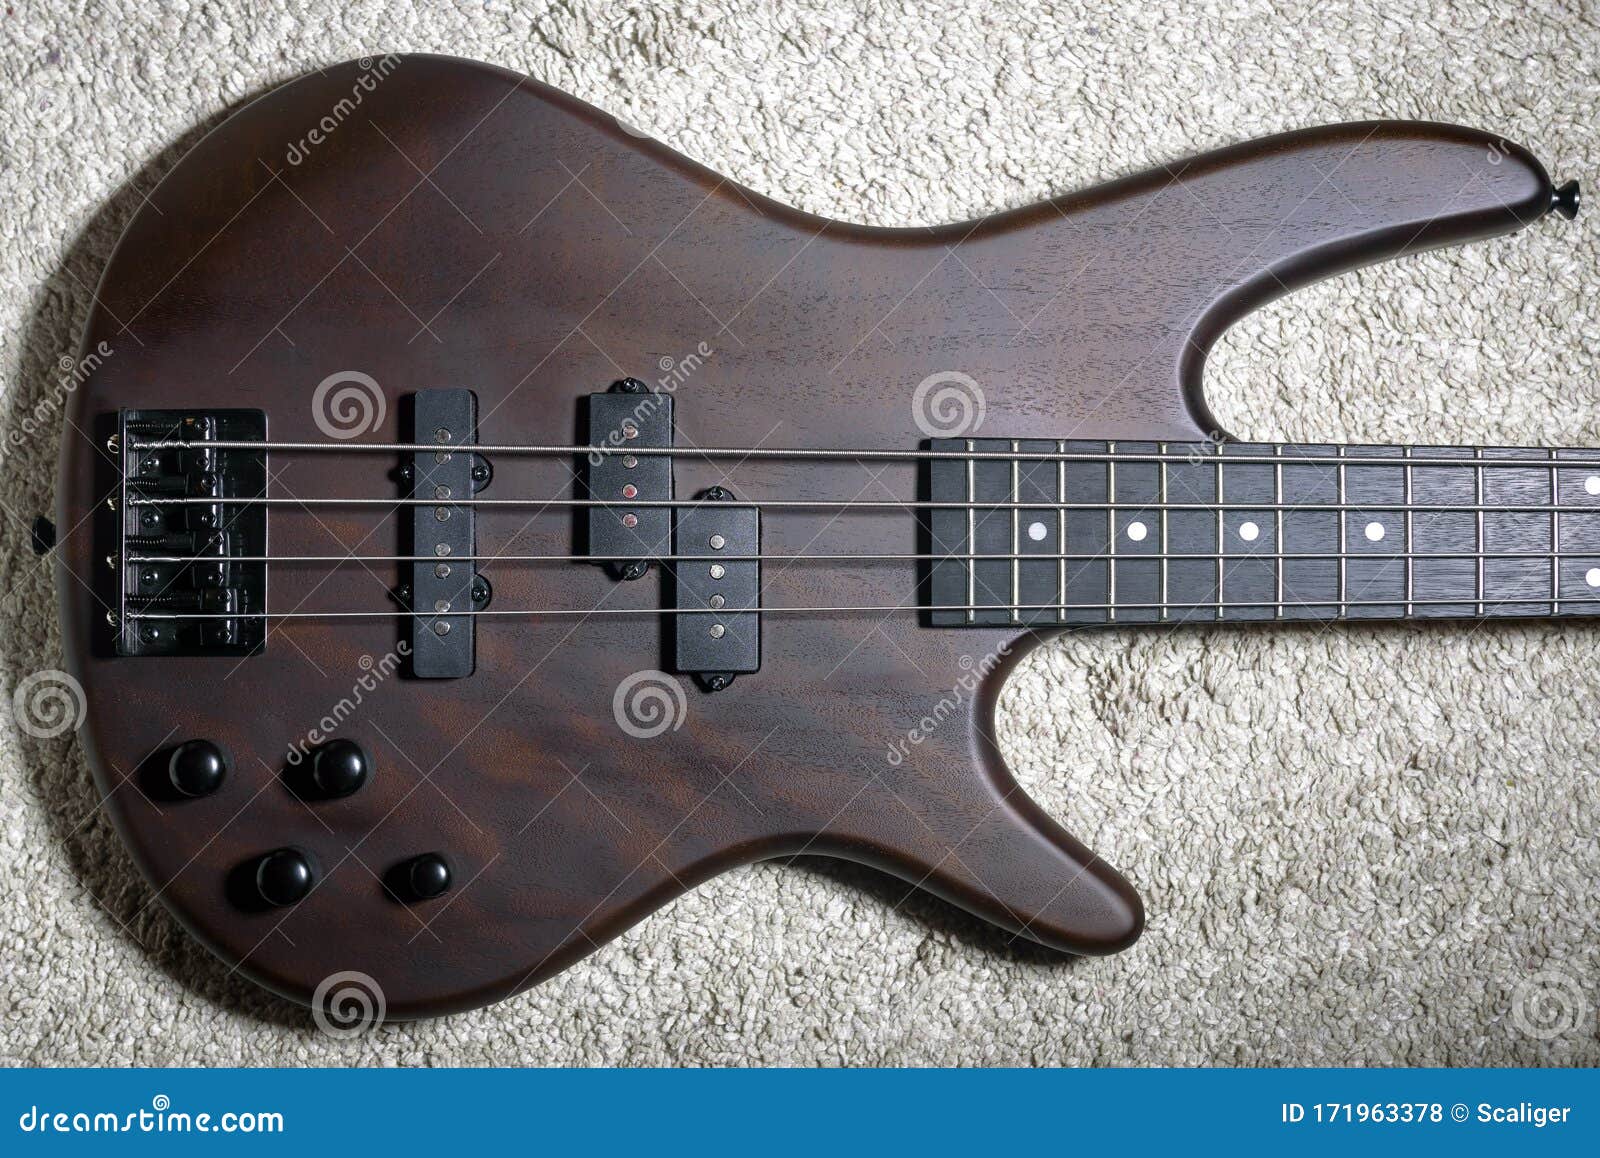 bass guitar with four strings. popular rock musical instrument. top view of brown electric bass on carpet